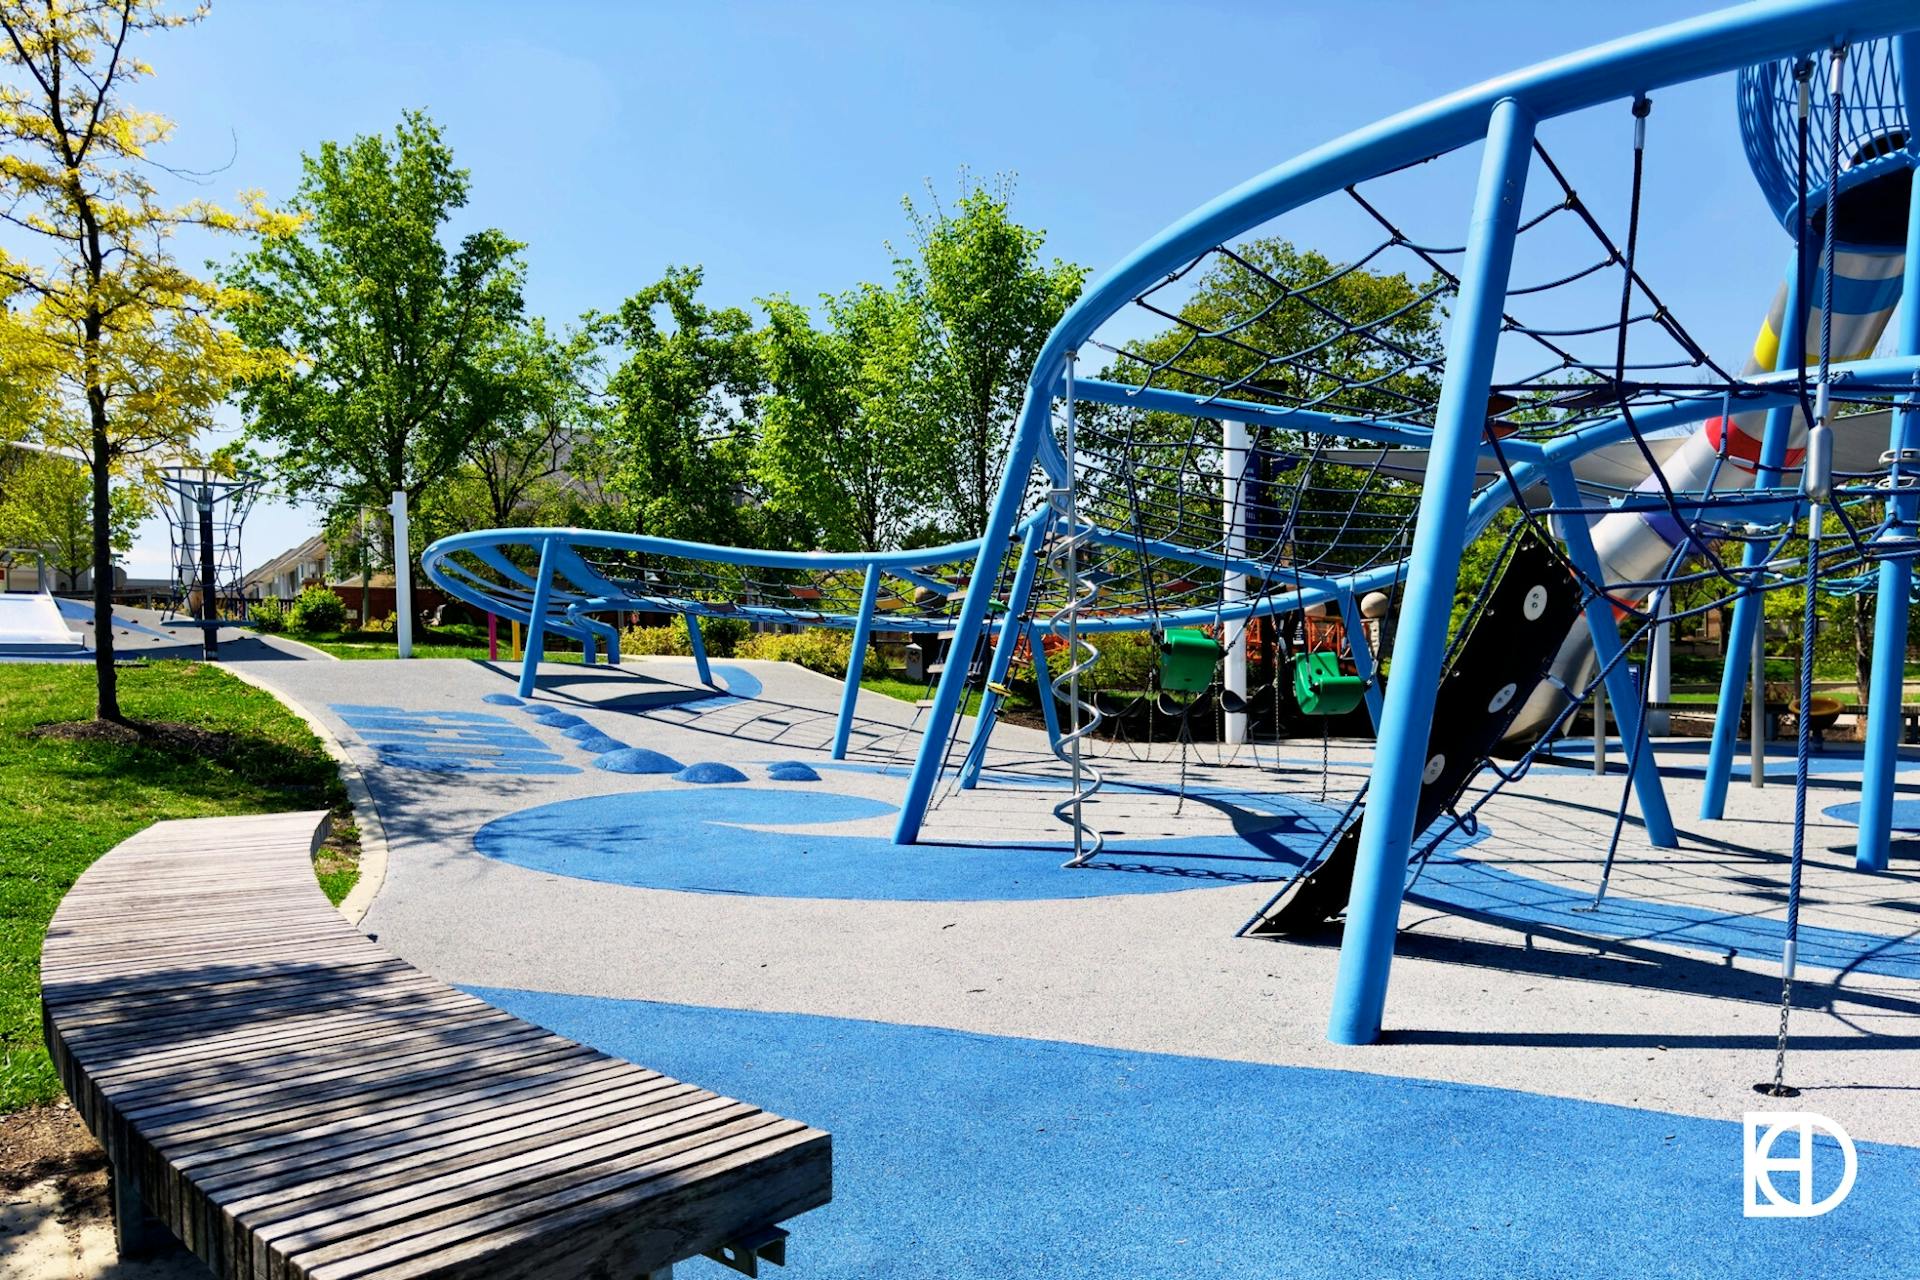 Photo of playground at Colts Canal Playspace